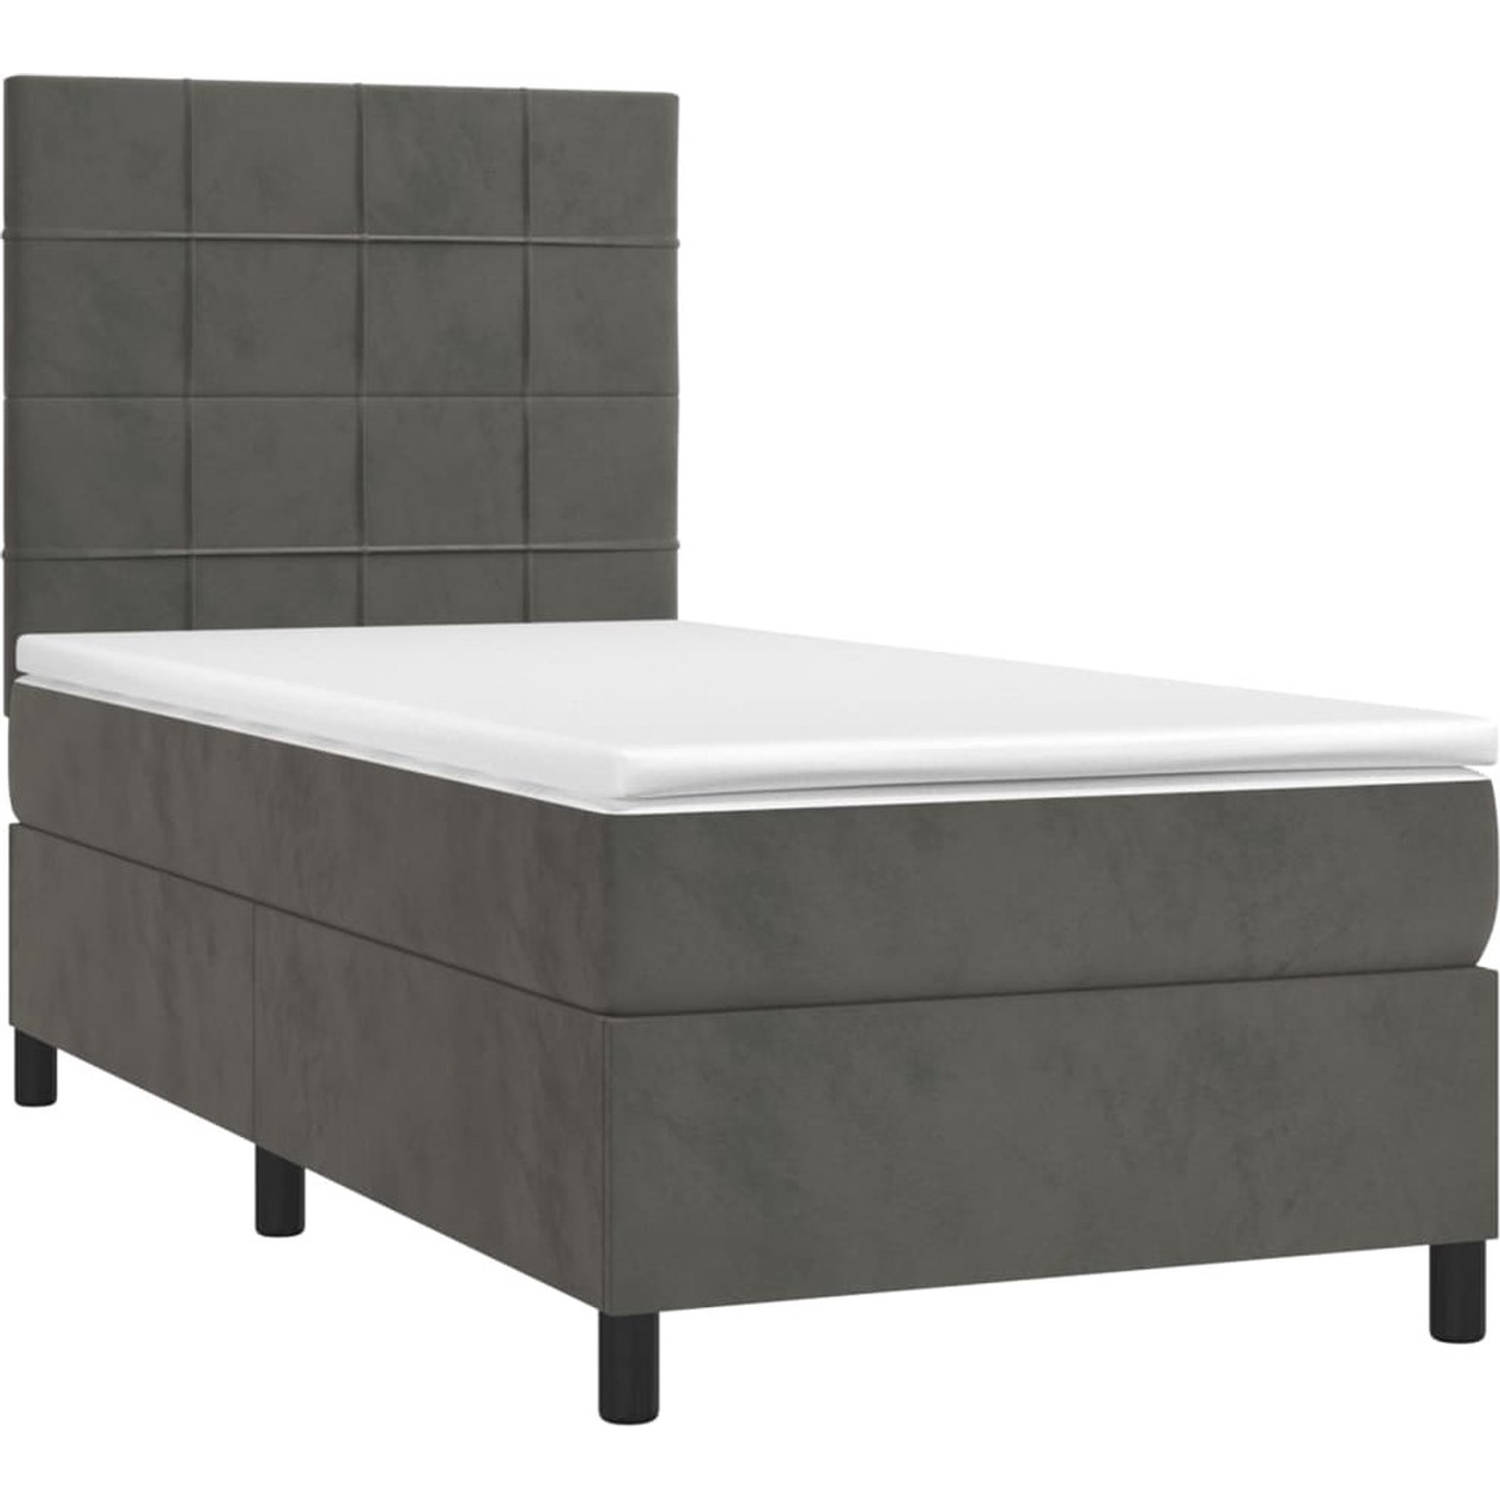 The Living Store Bed The Living Store Donkergrijs Fluweel Bed 203x80x118/128 cm - LED Met Matras